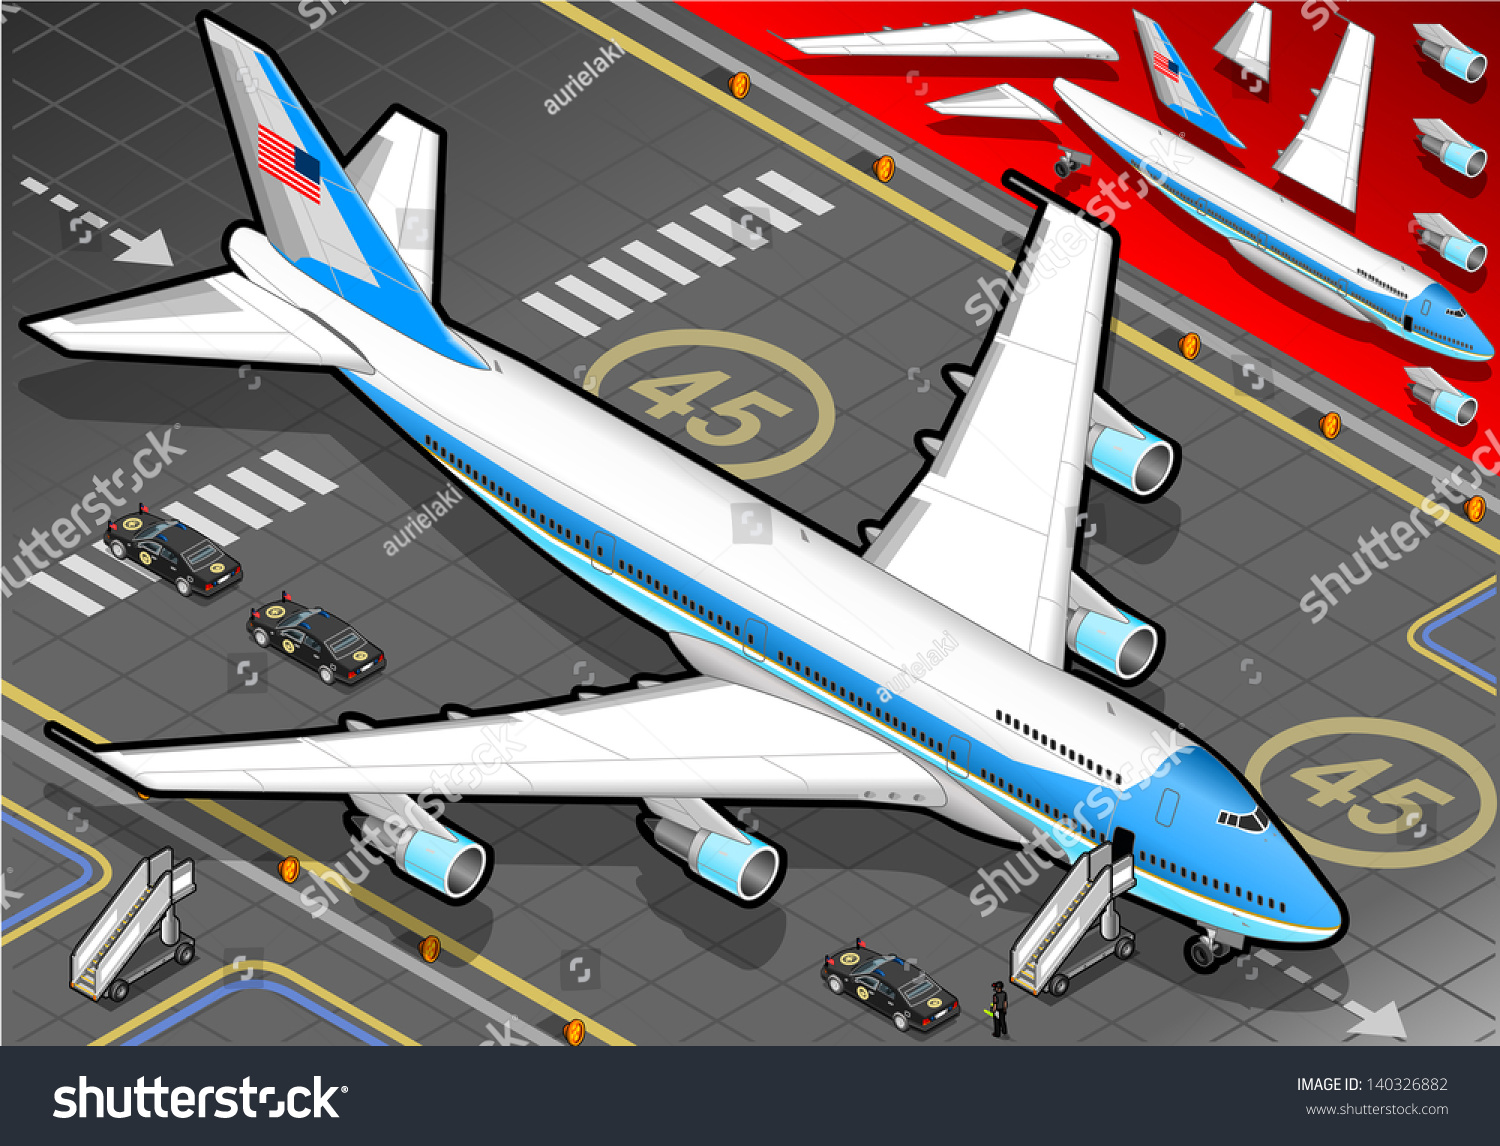 SVG of Boeing aircraft. Flat 3D isometric airplane vehicles. Plane Infographic elements. Landed Airplane in Airport. Armed Forces Military Aeroplane Isolated. Presidential Air Force One Vector Illustration. svg